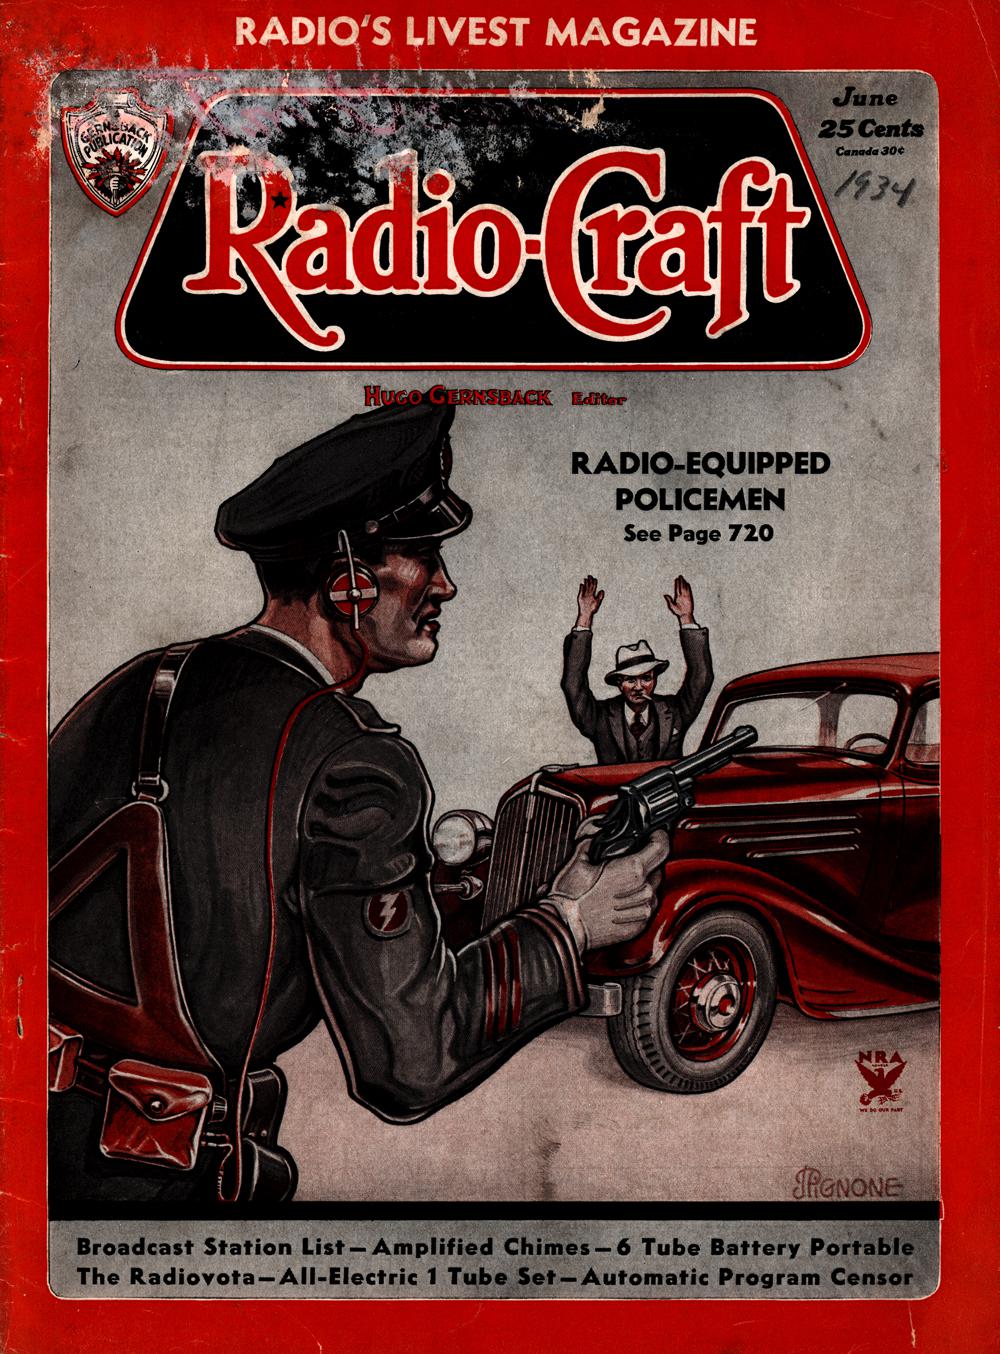 1934 - Radio-craft. and popular electronics; radio-electronics in all its phases - Vol. 5, No. 12